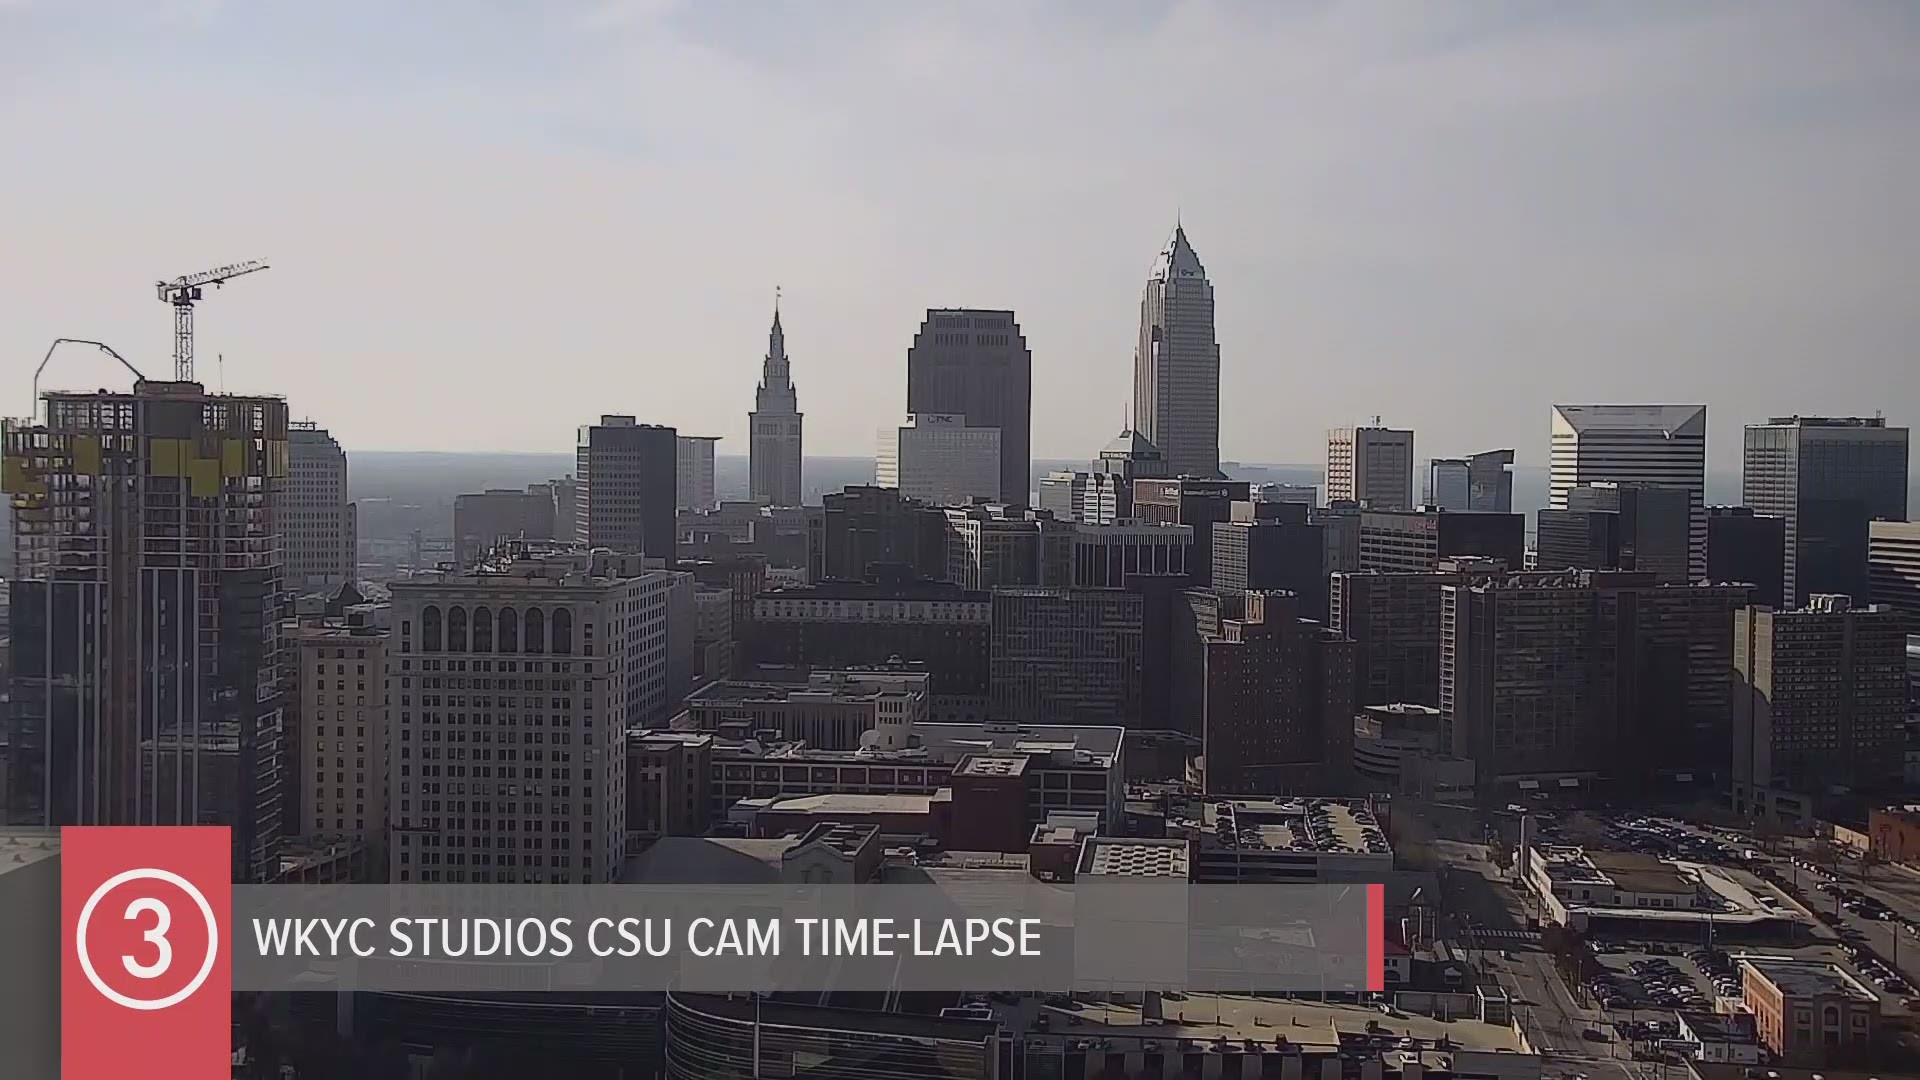 Here's Monday afternoon weather time-lapse from the WKYC Studios CSU Cam showing a beautiful day in the neighborhood... a beautiful day for feeling good. Enjoy!